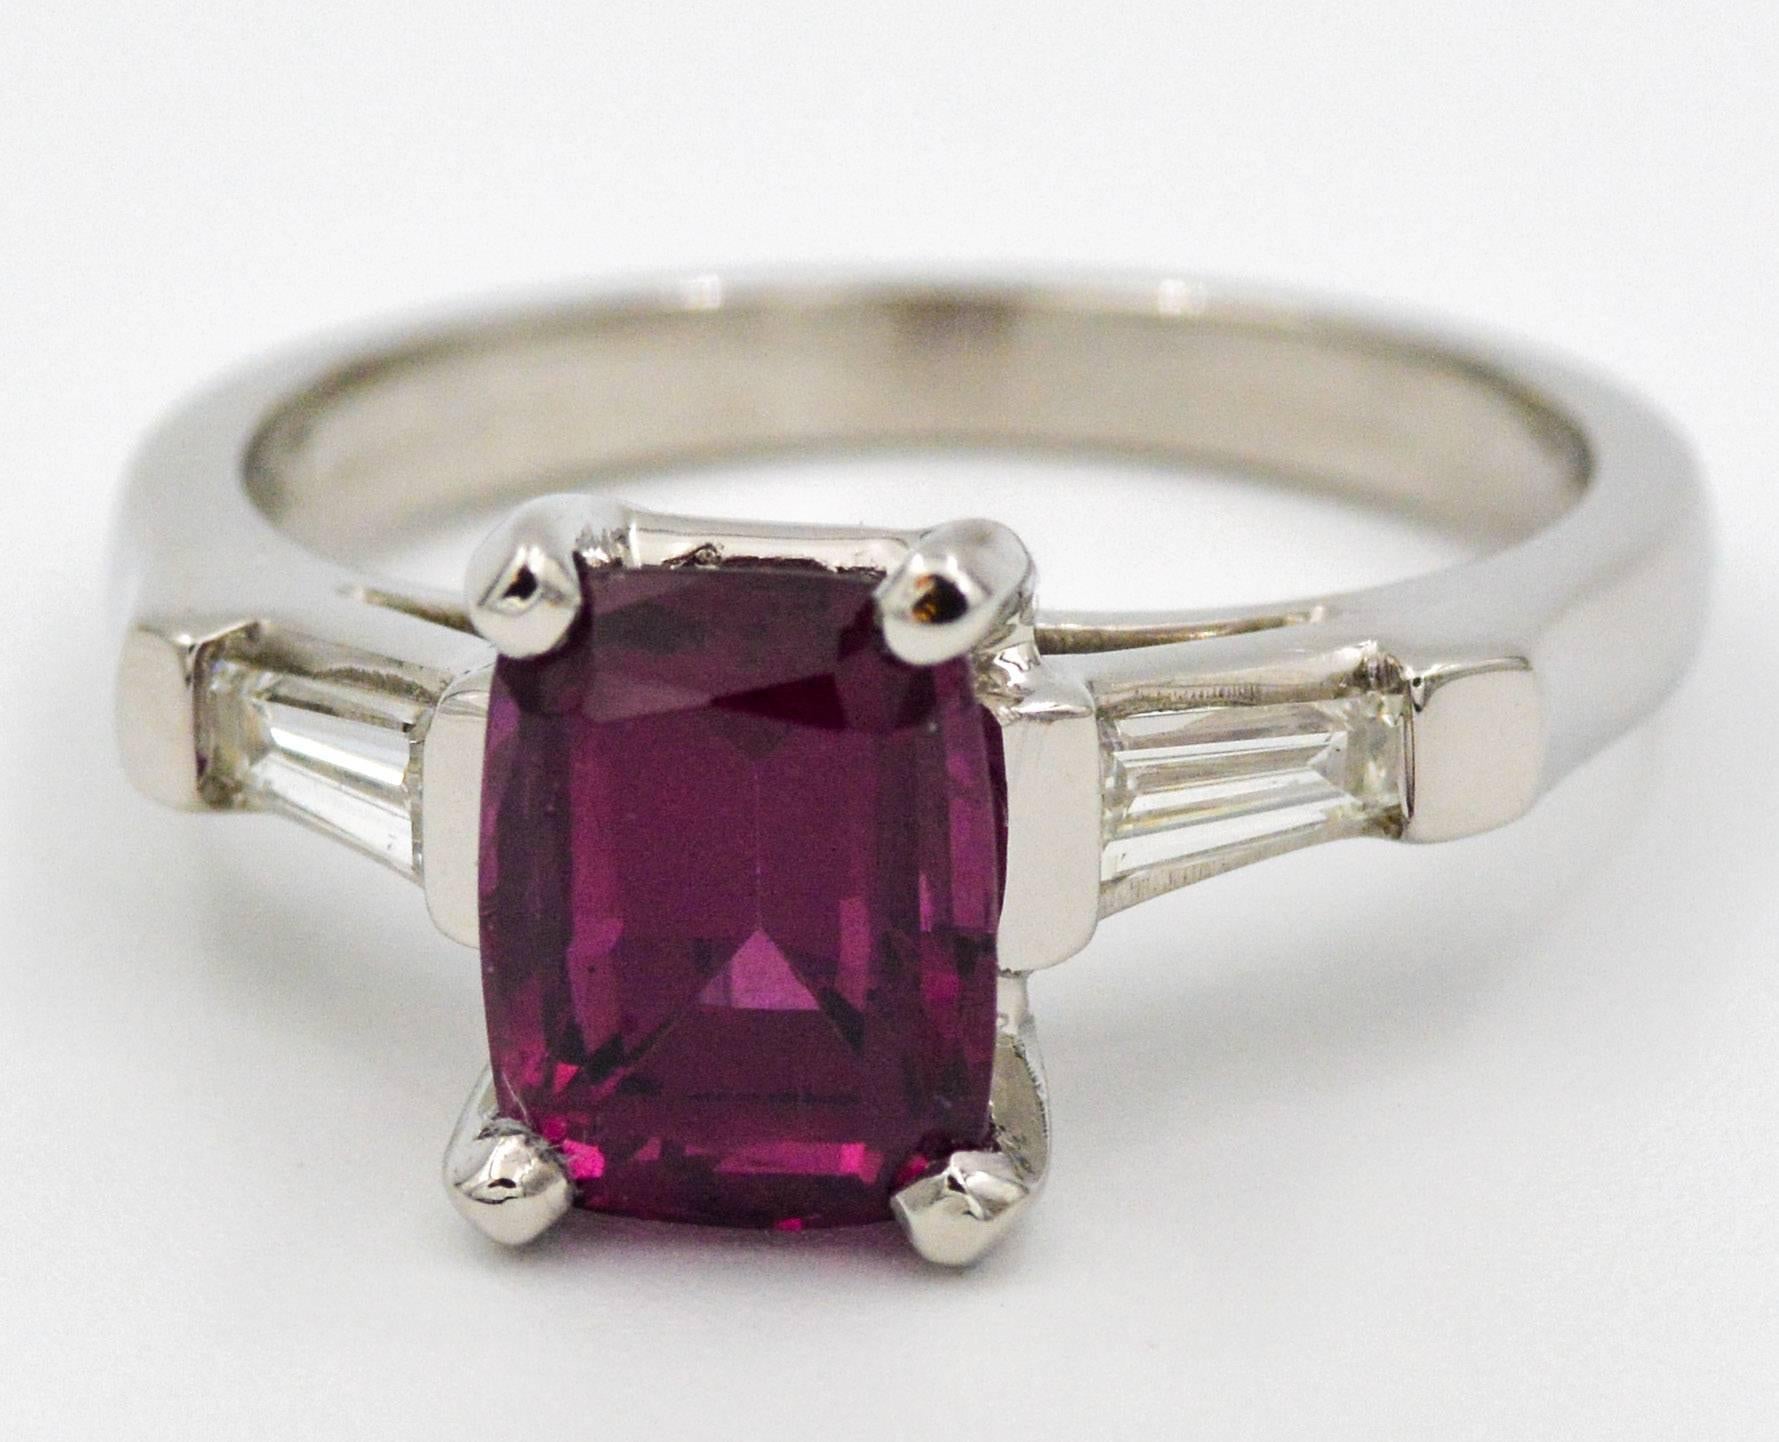 This stunning ring features a radiant cut red garnet that weighs 2.79 carats.  The garnet is contrasted by two beautiful tapered baguette cut diamonds.  The two baguette cut diamonds have combined weight of 0.30 carats with g-H color and VS clarity.